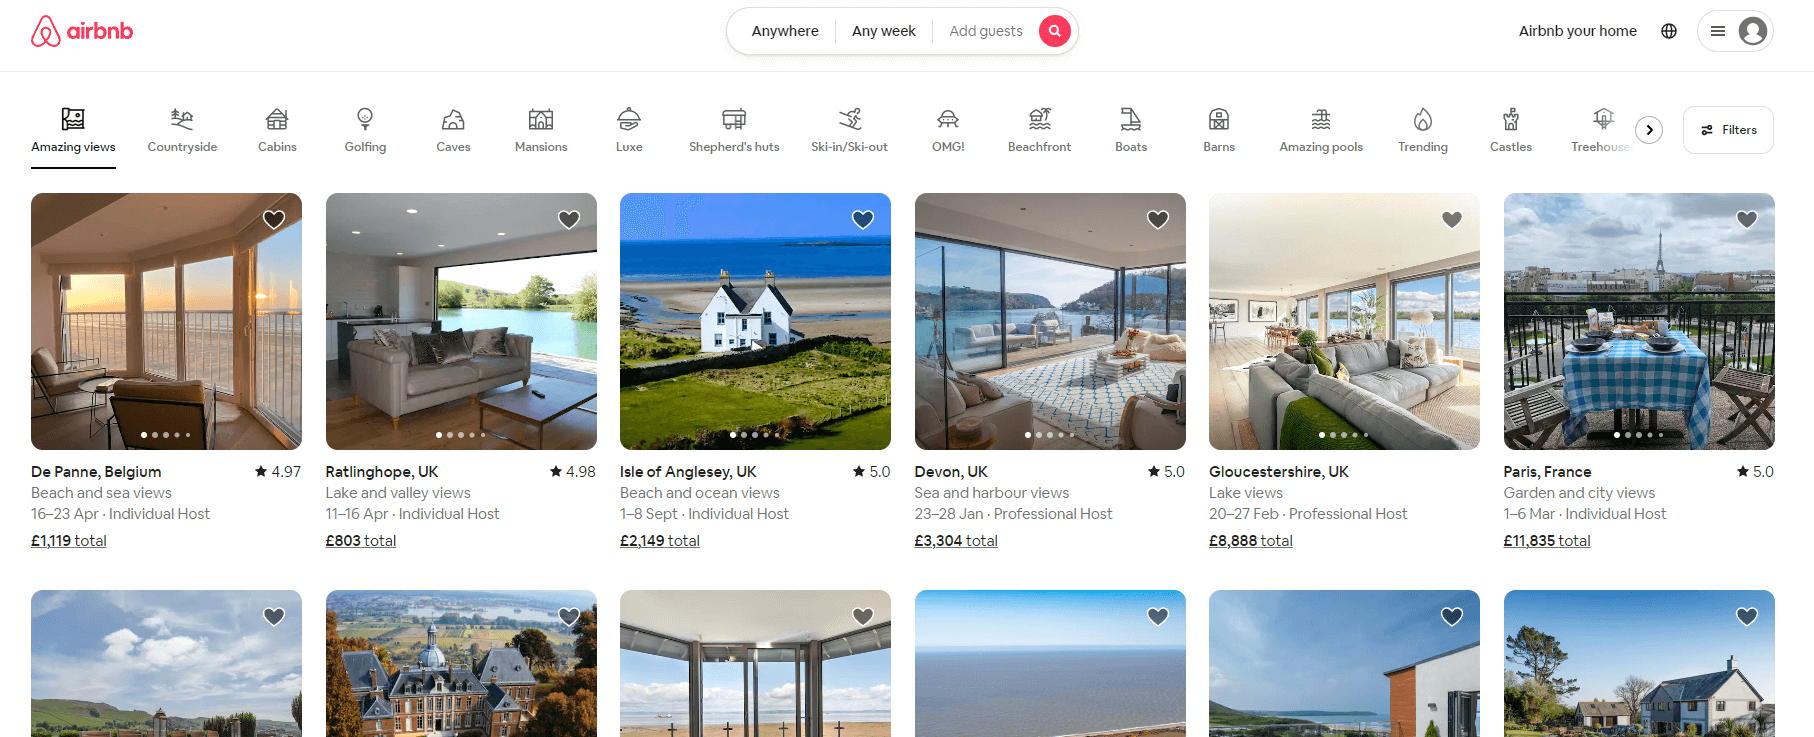 Airbnb introduction